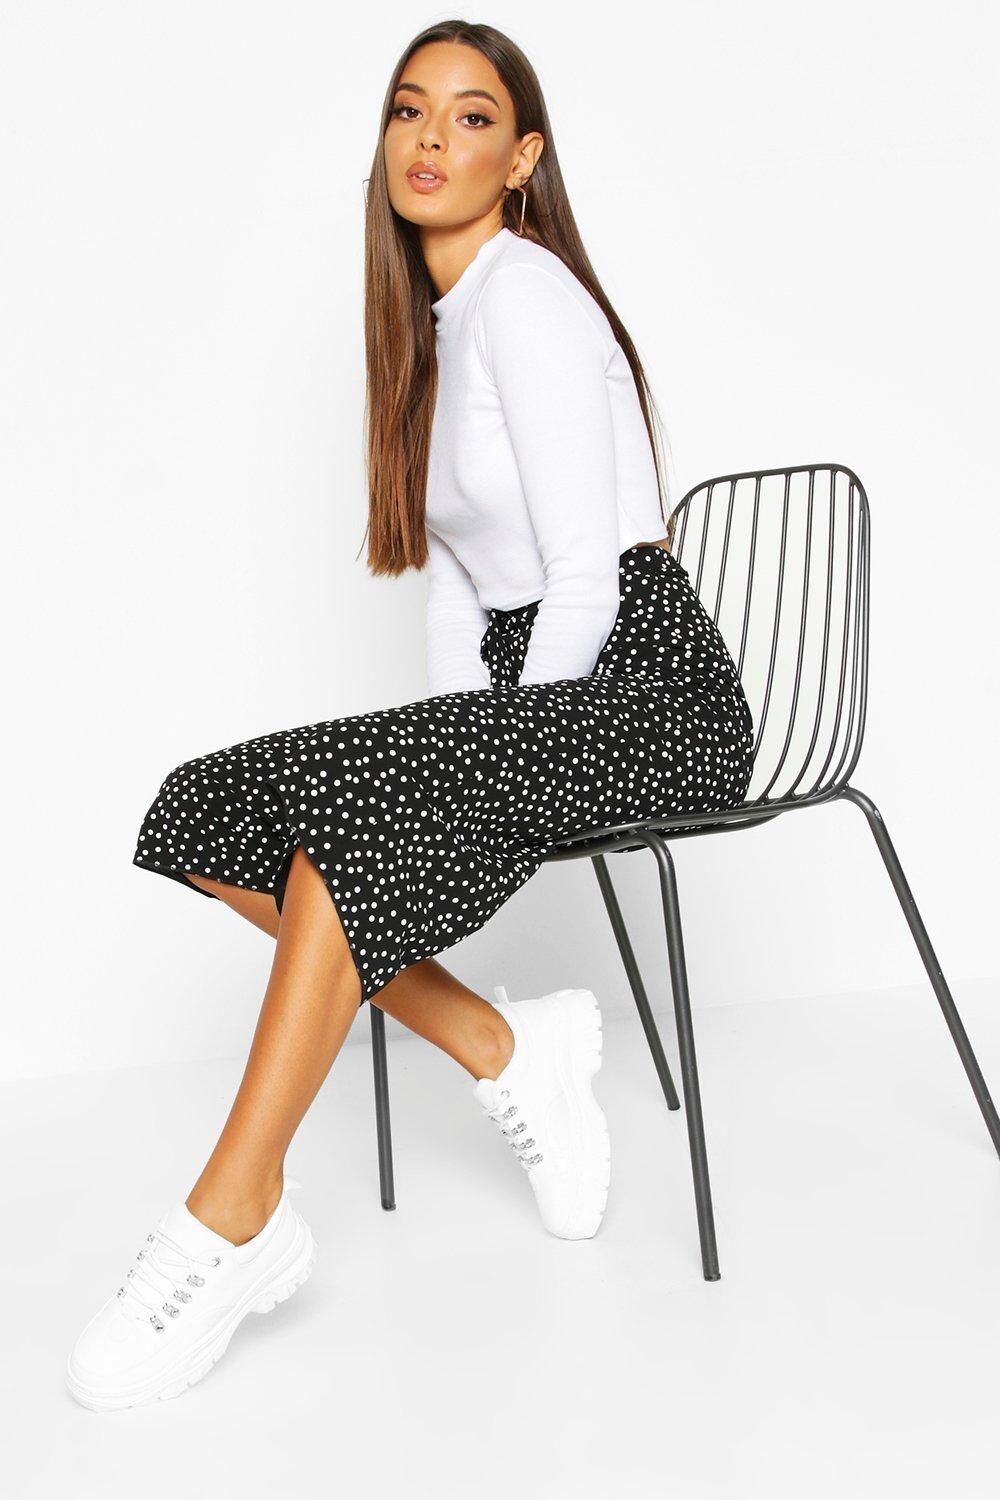 Boohoo Belted Woven Polka Dot Culottes- Black  - Size: 8